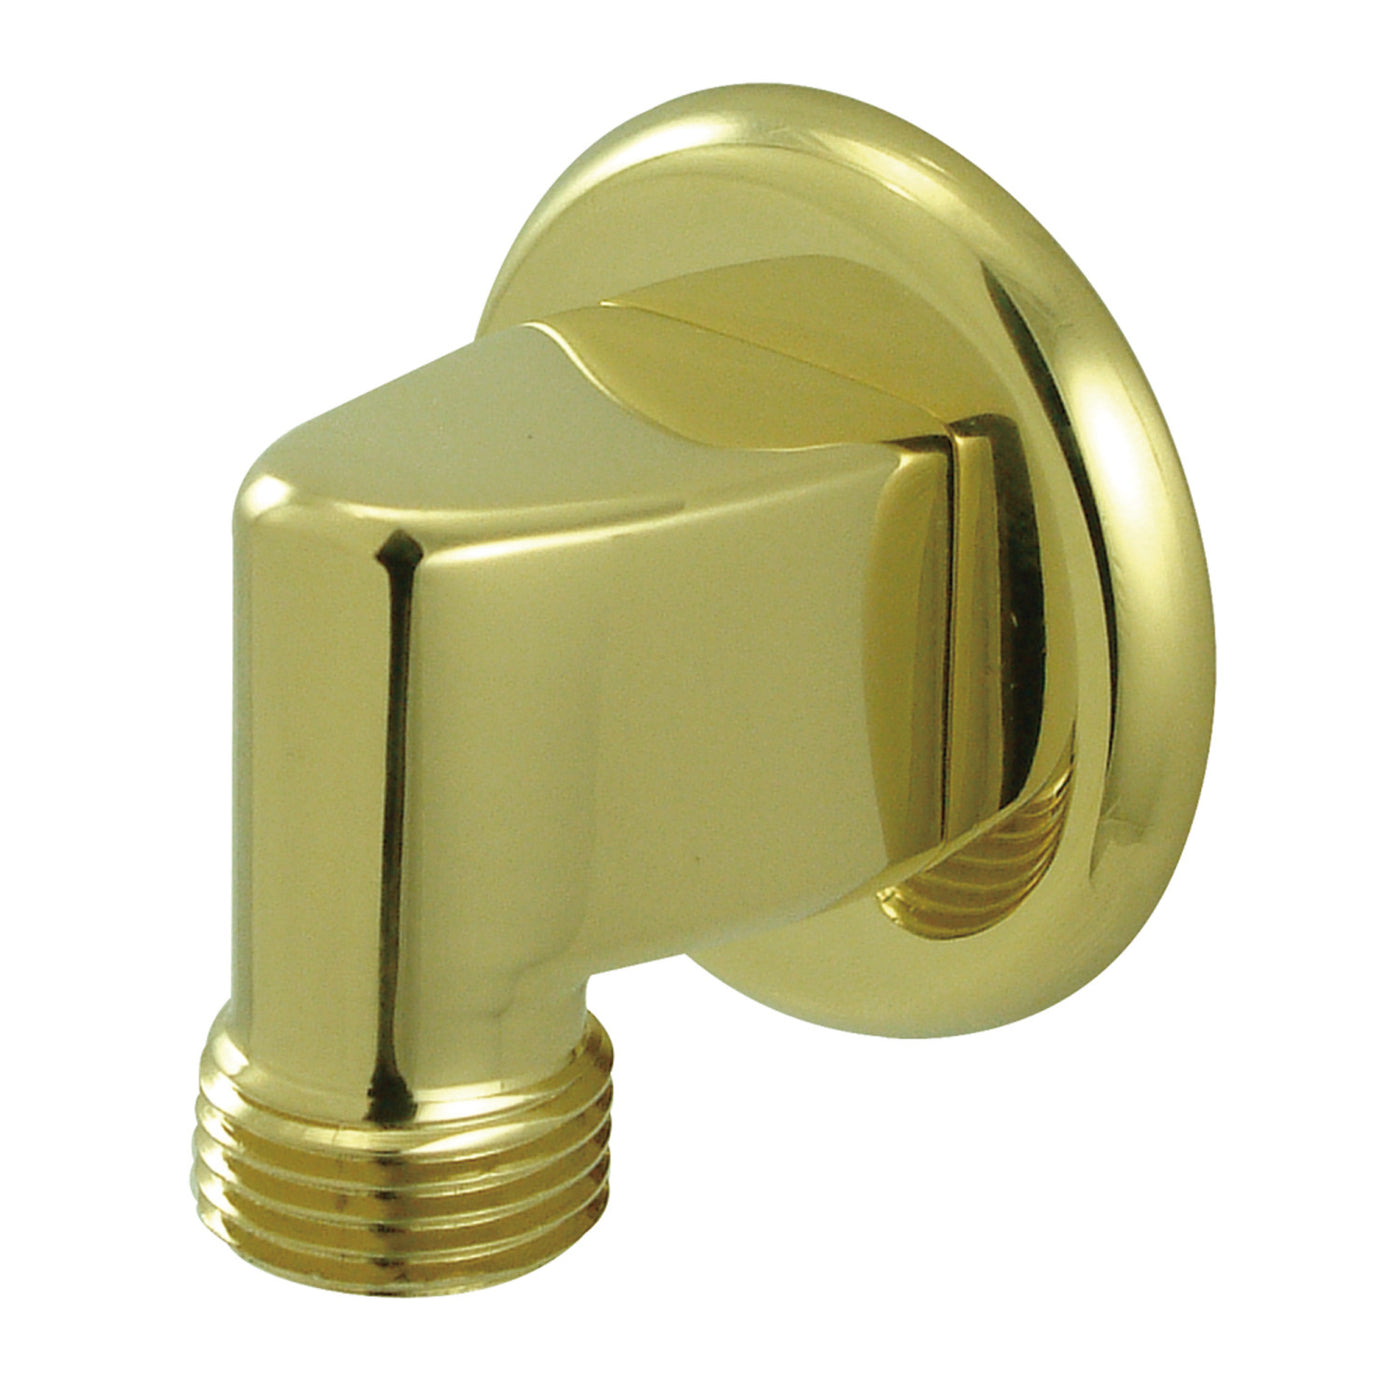 Elements of Design DK173A2 Wall Mount Supply Elbow, Polished Brass